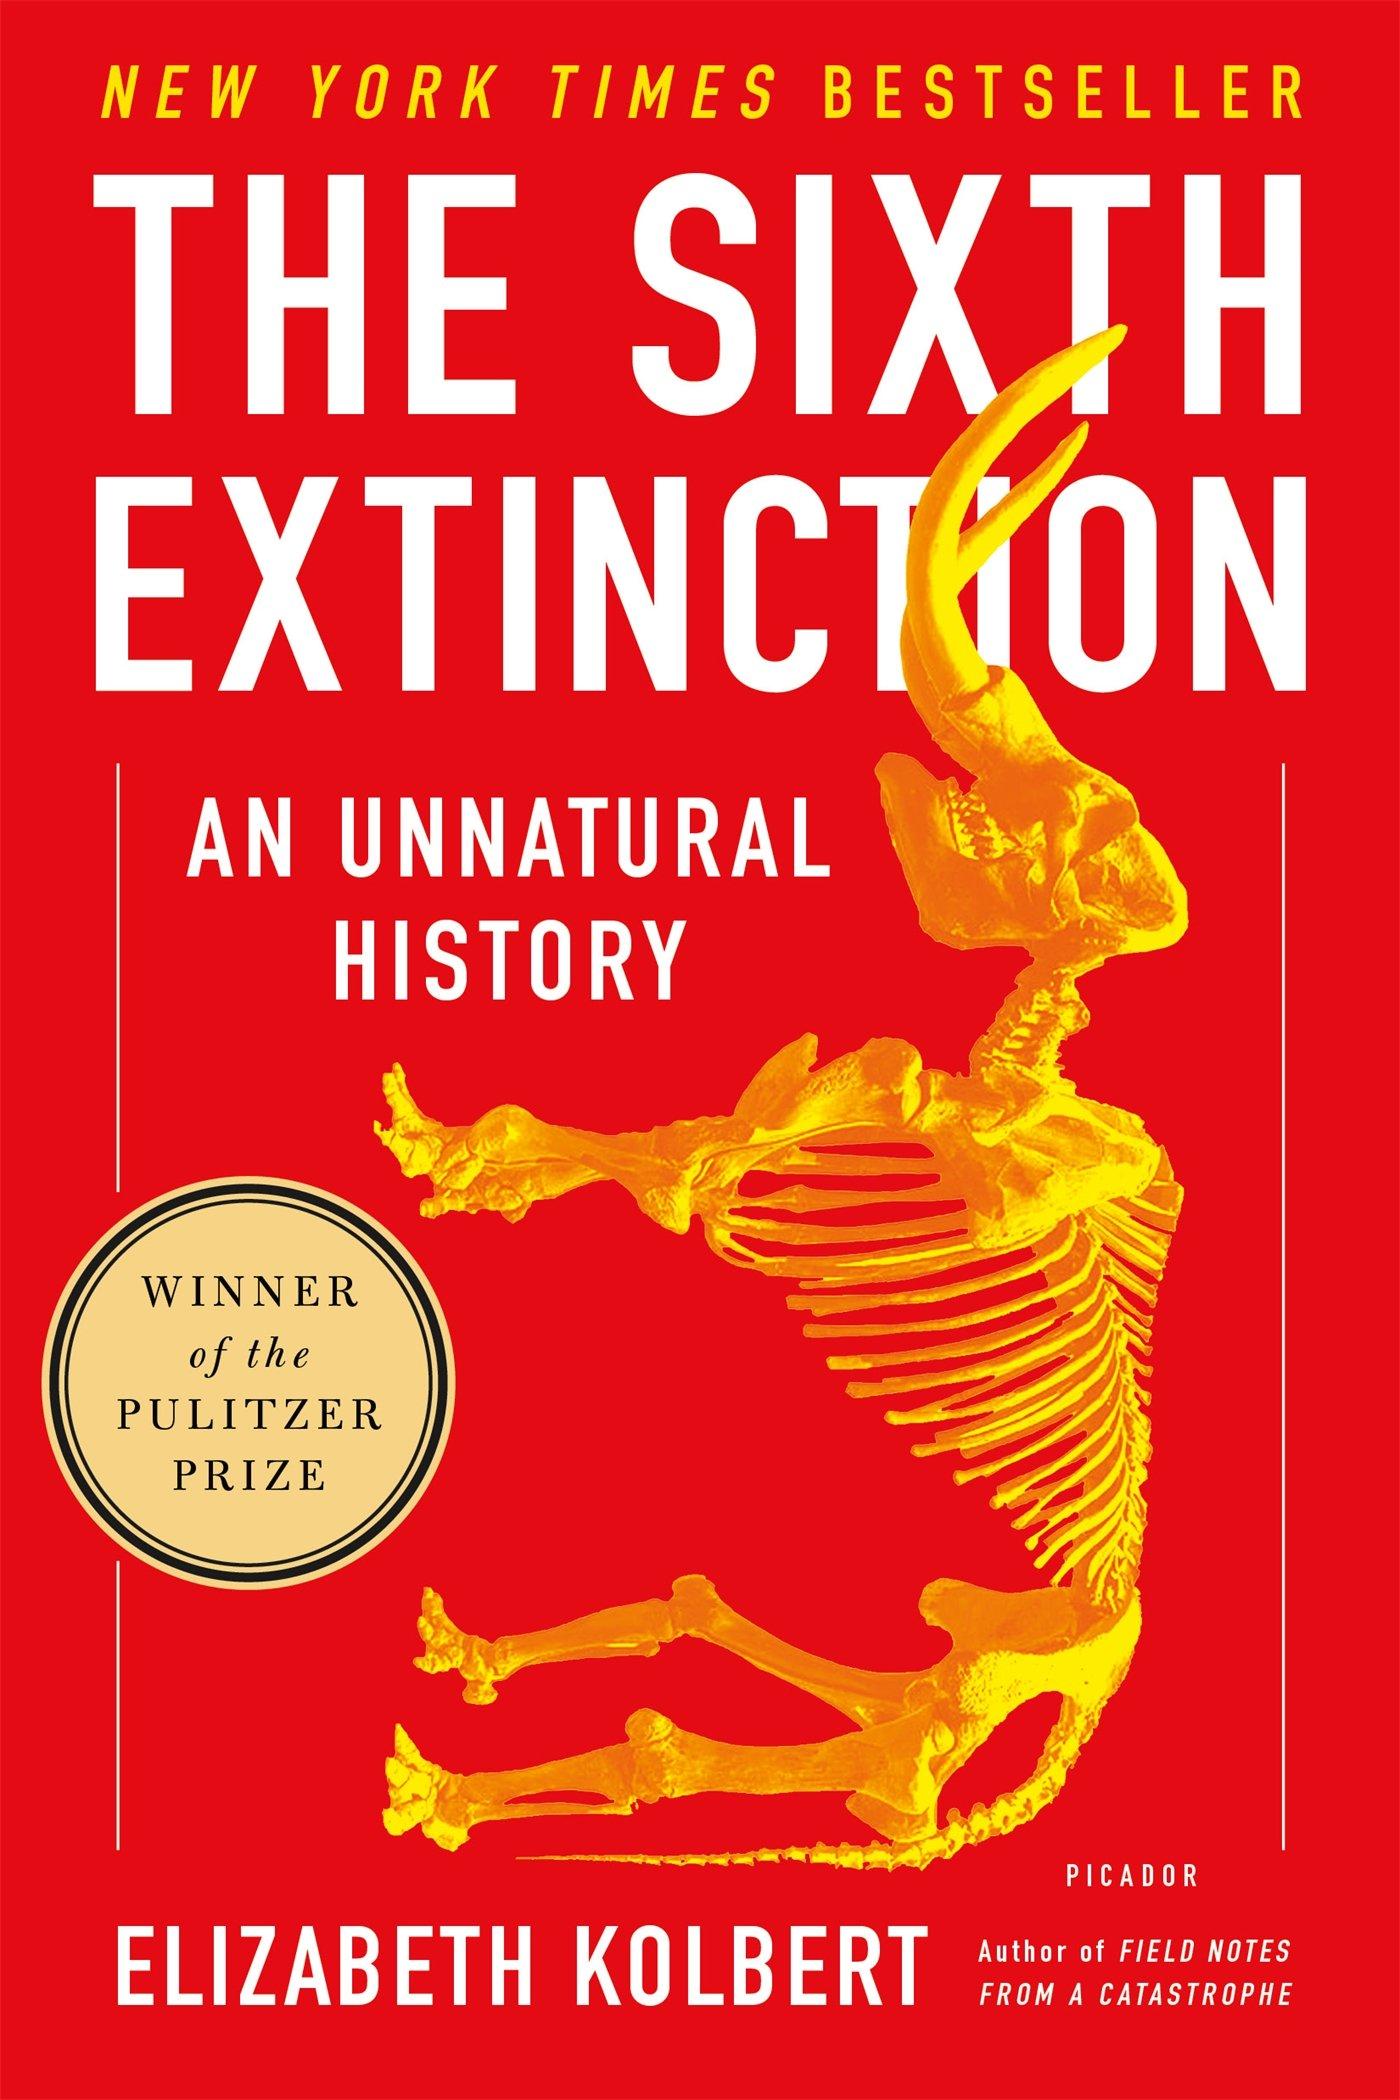 the sixth great extinction book